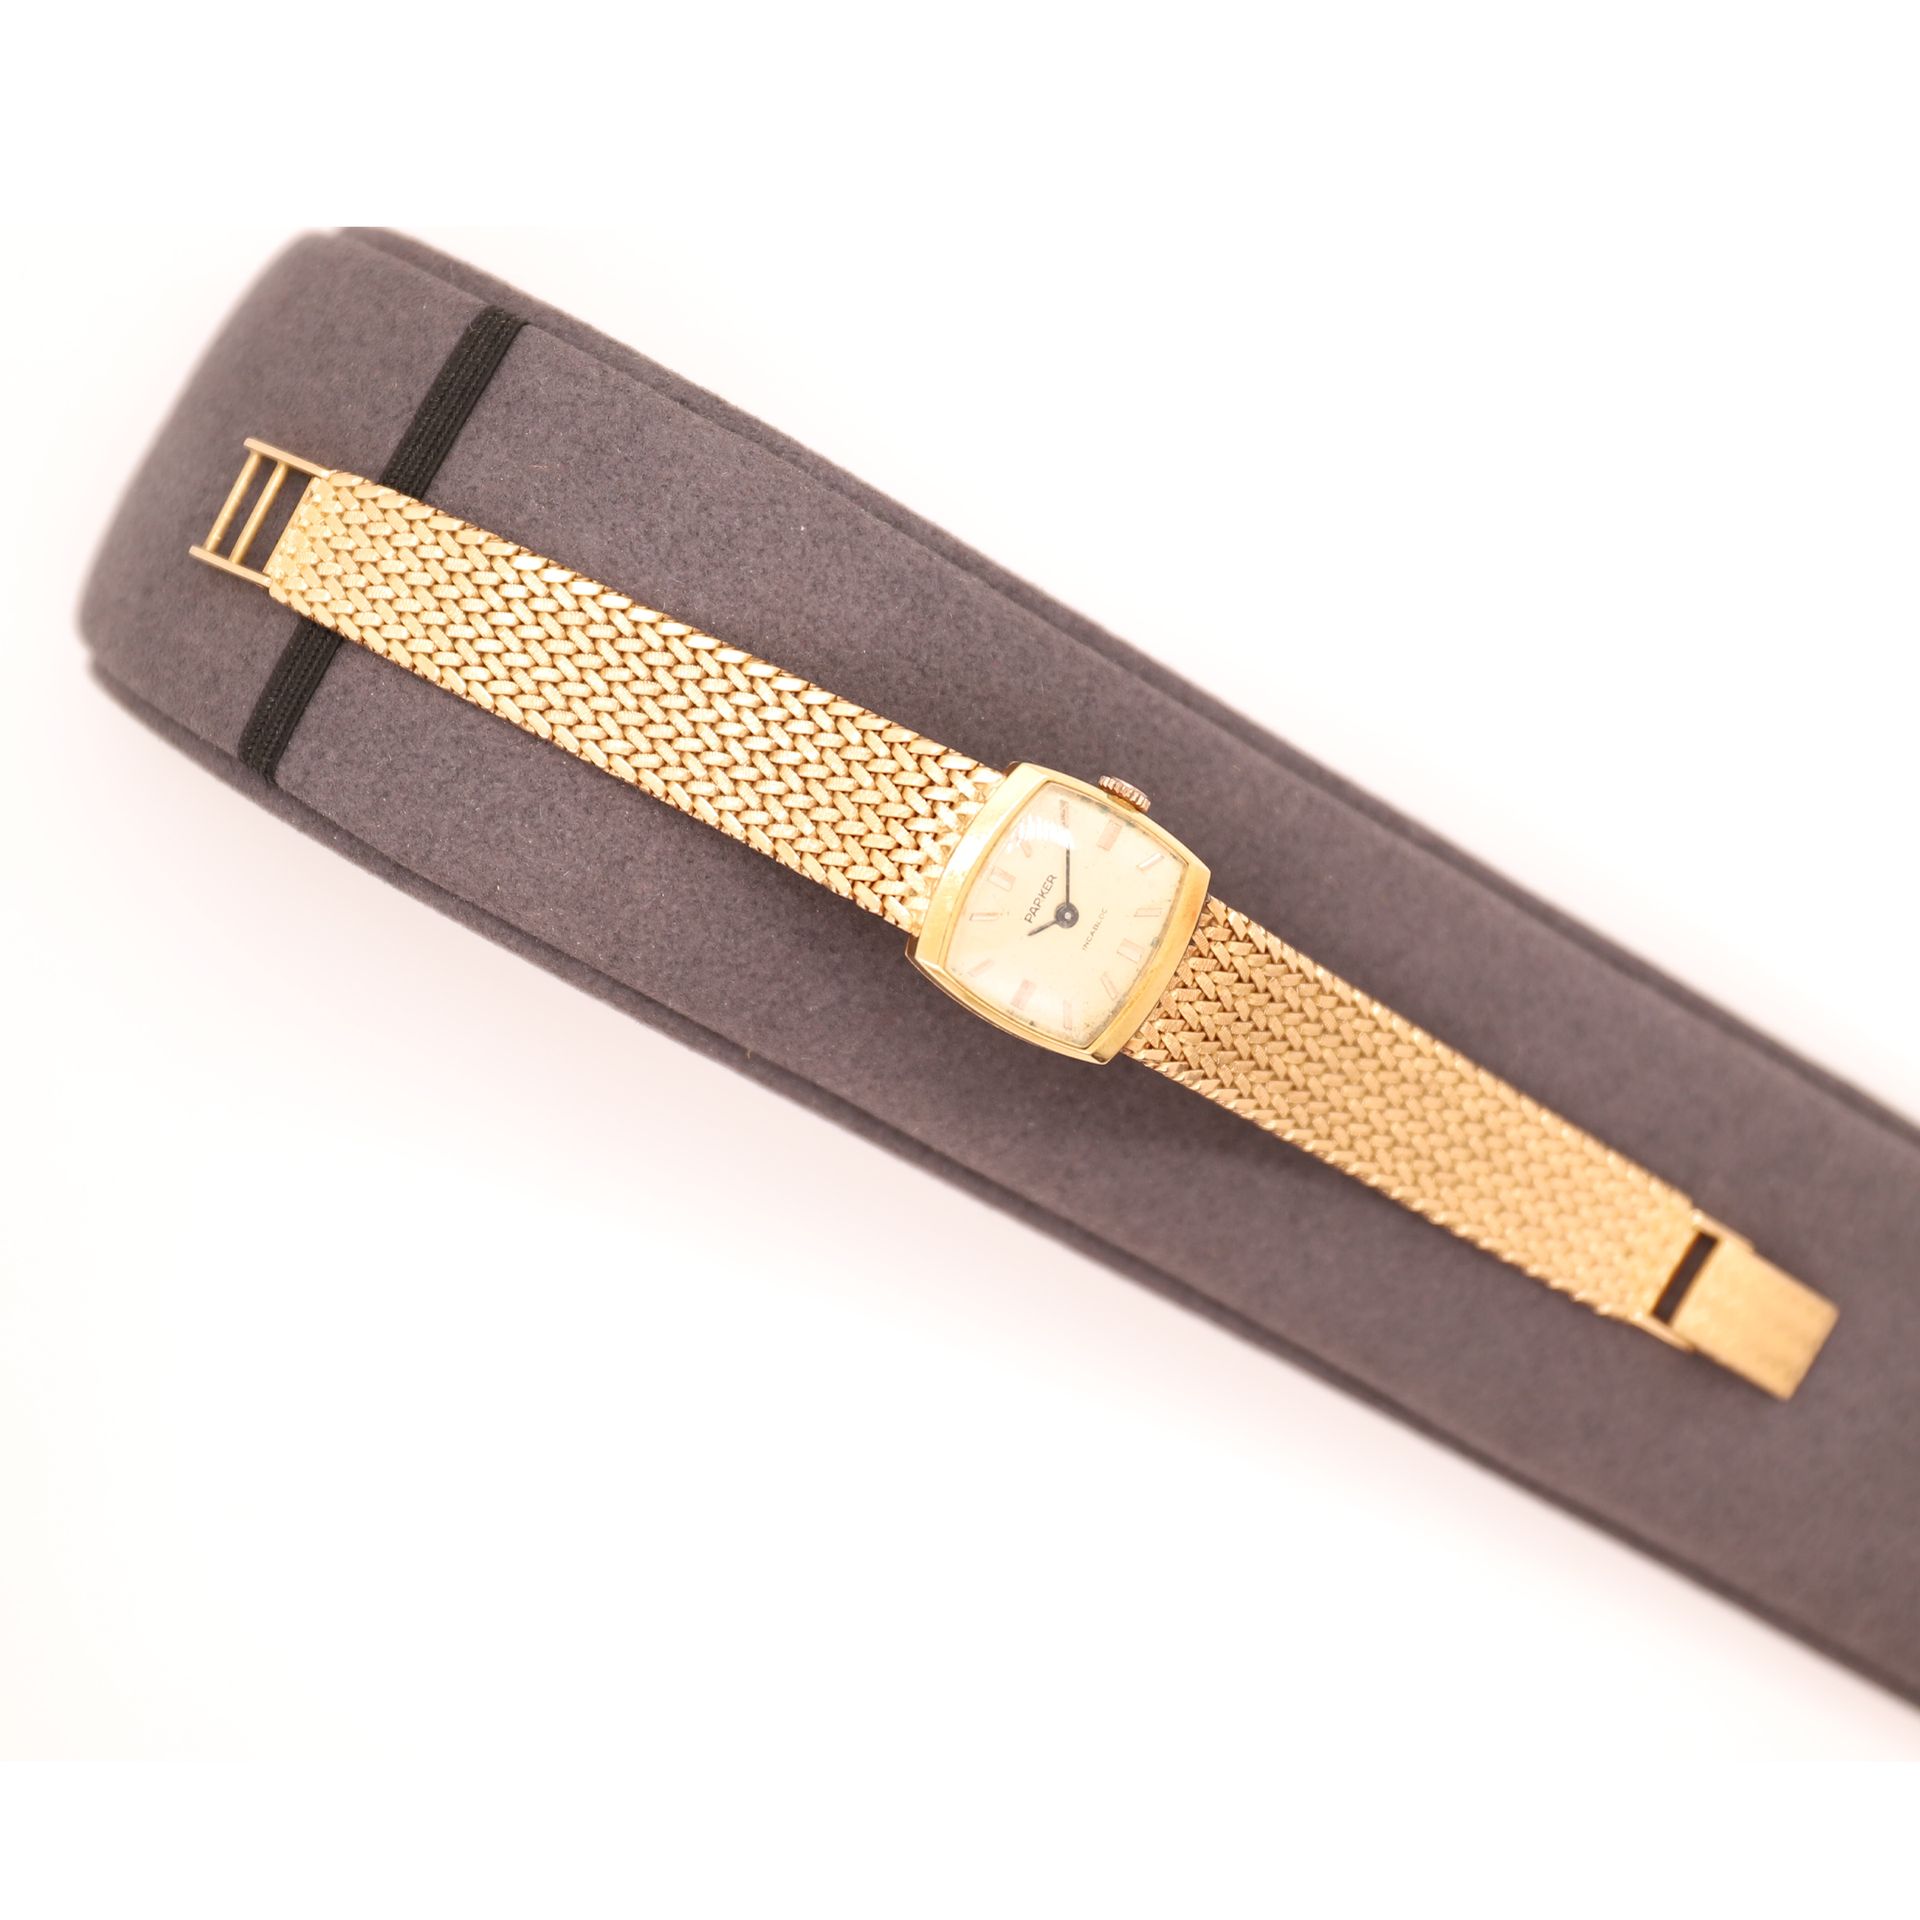 Null LADY'S WATCH PARKER "INCABLOC" IN GOLD

Pb : 40 grs

Wear